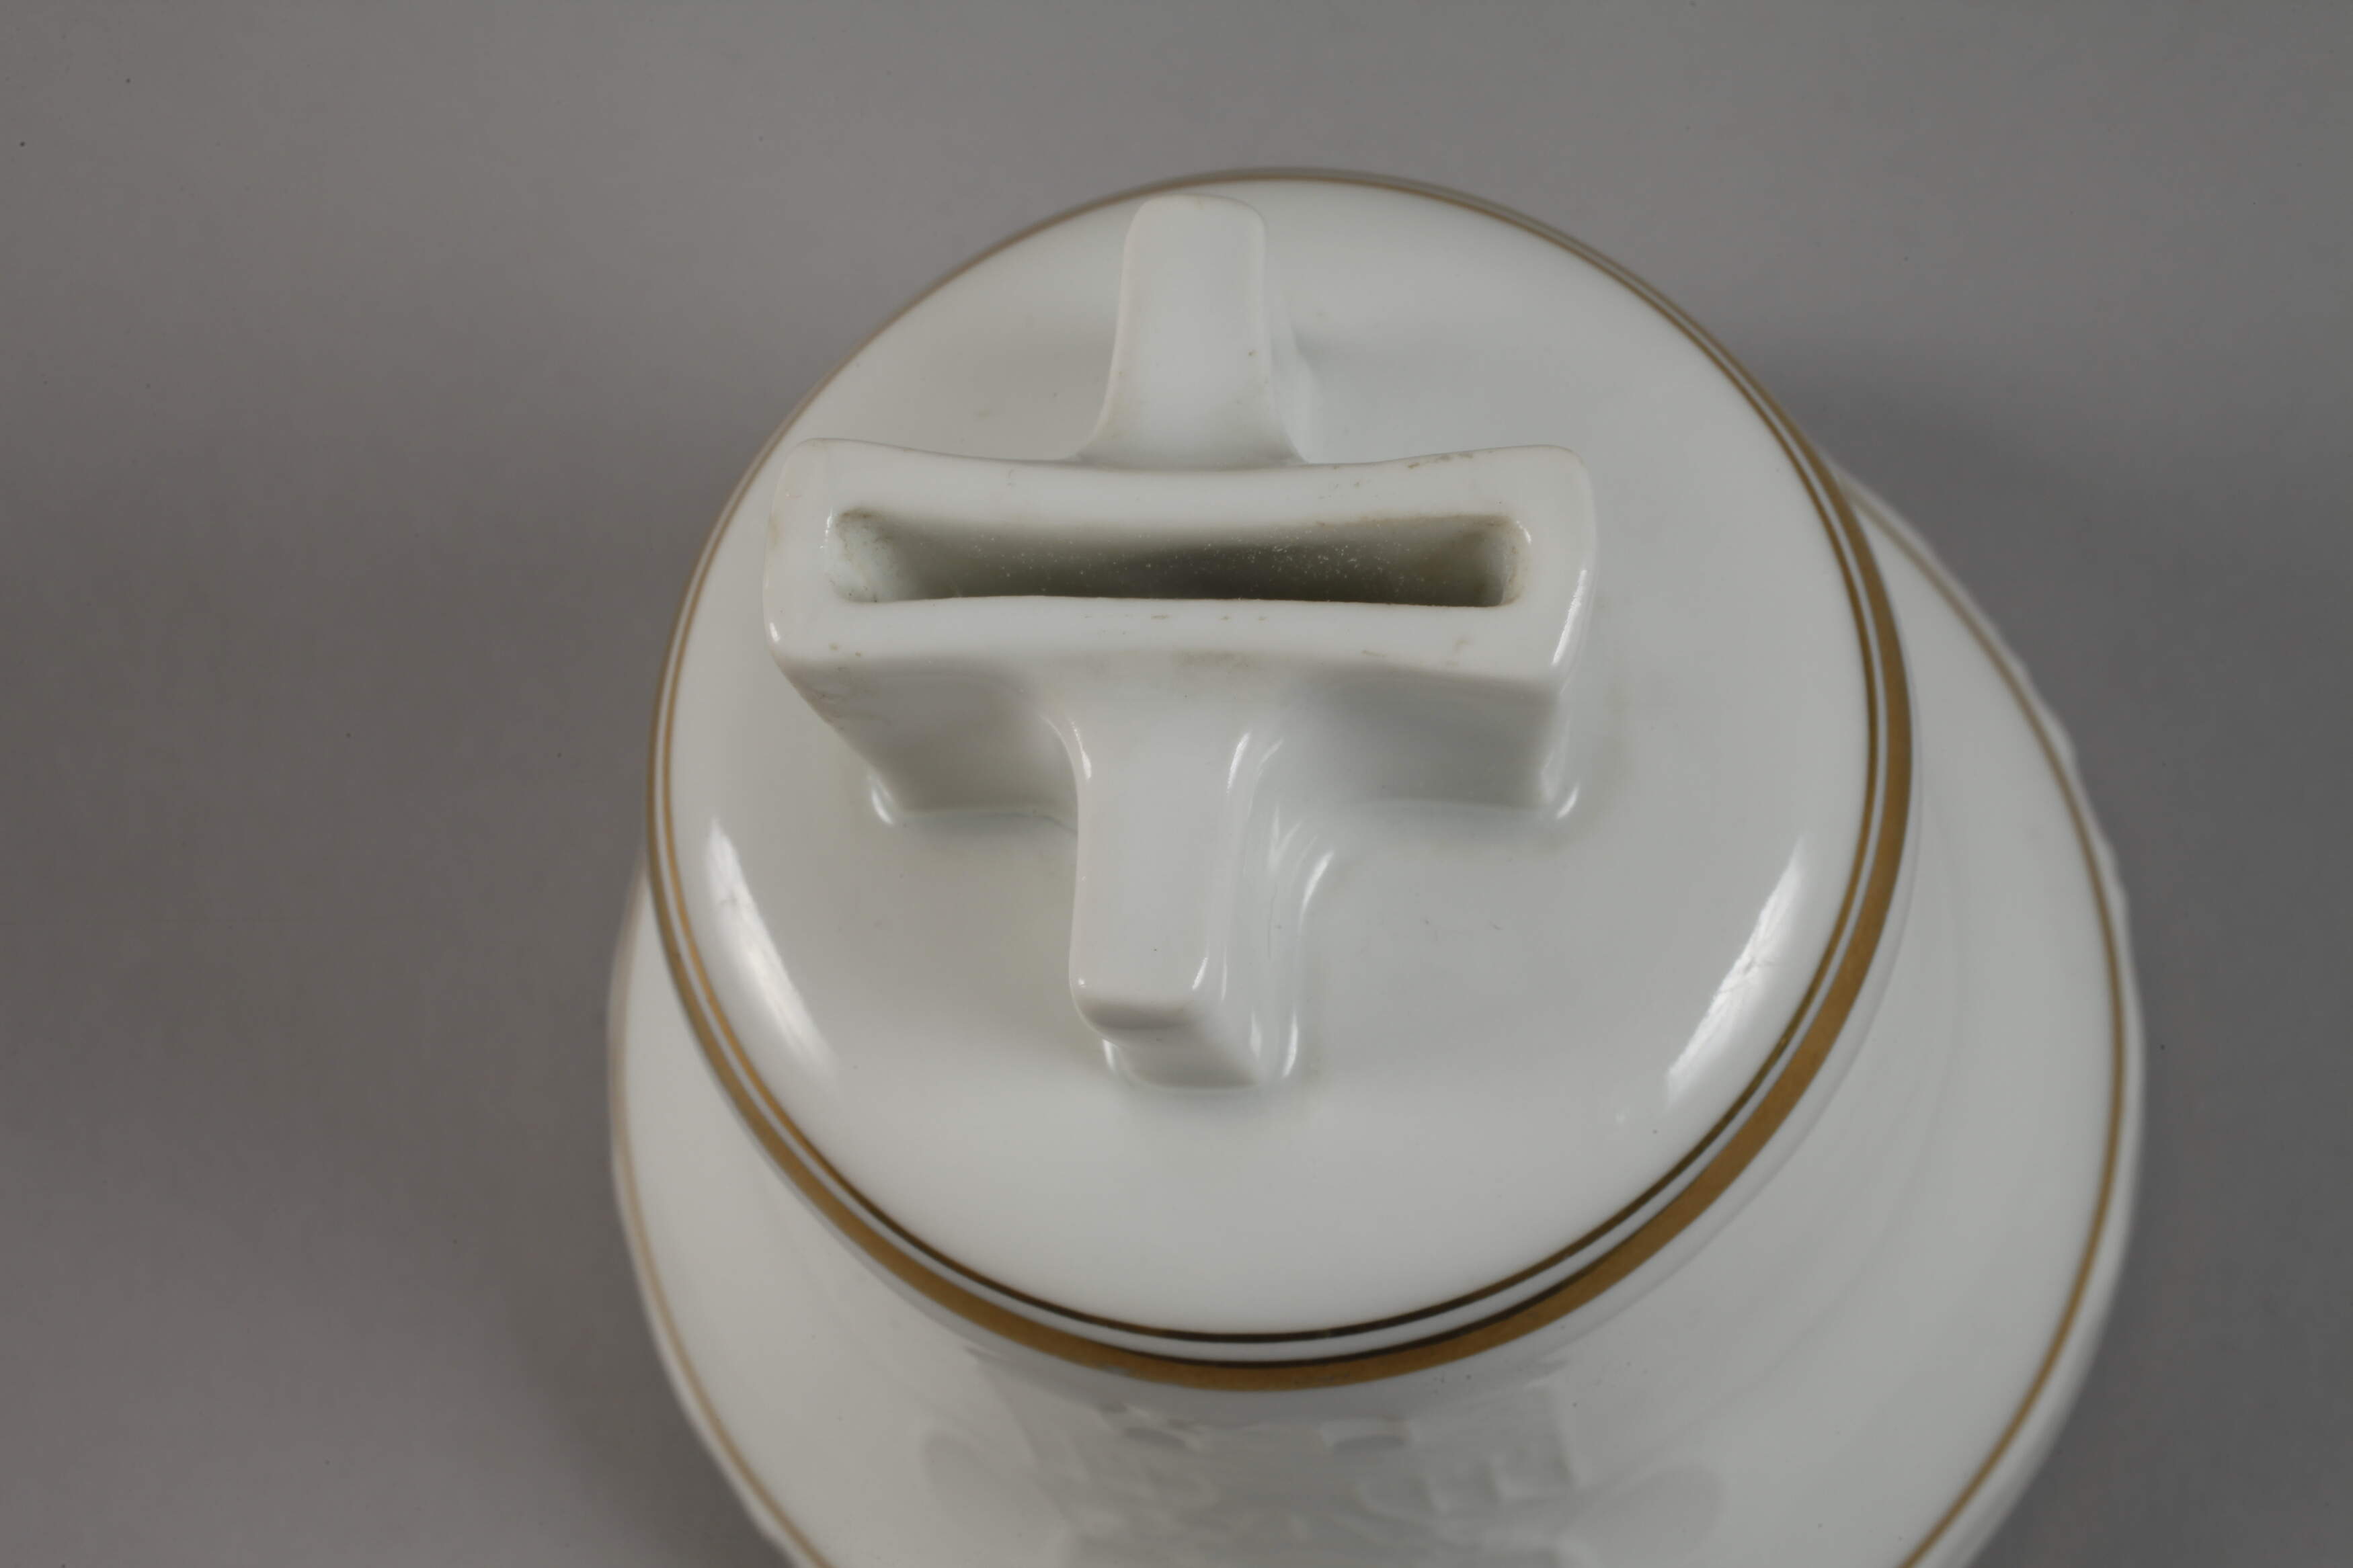 Porcelain bell Olympia 1936 - Image 5 of 5